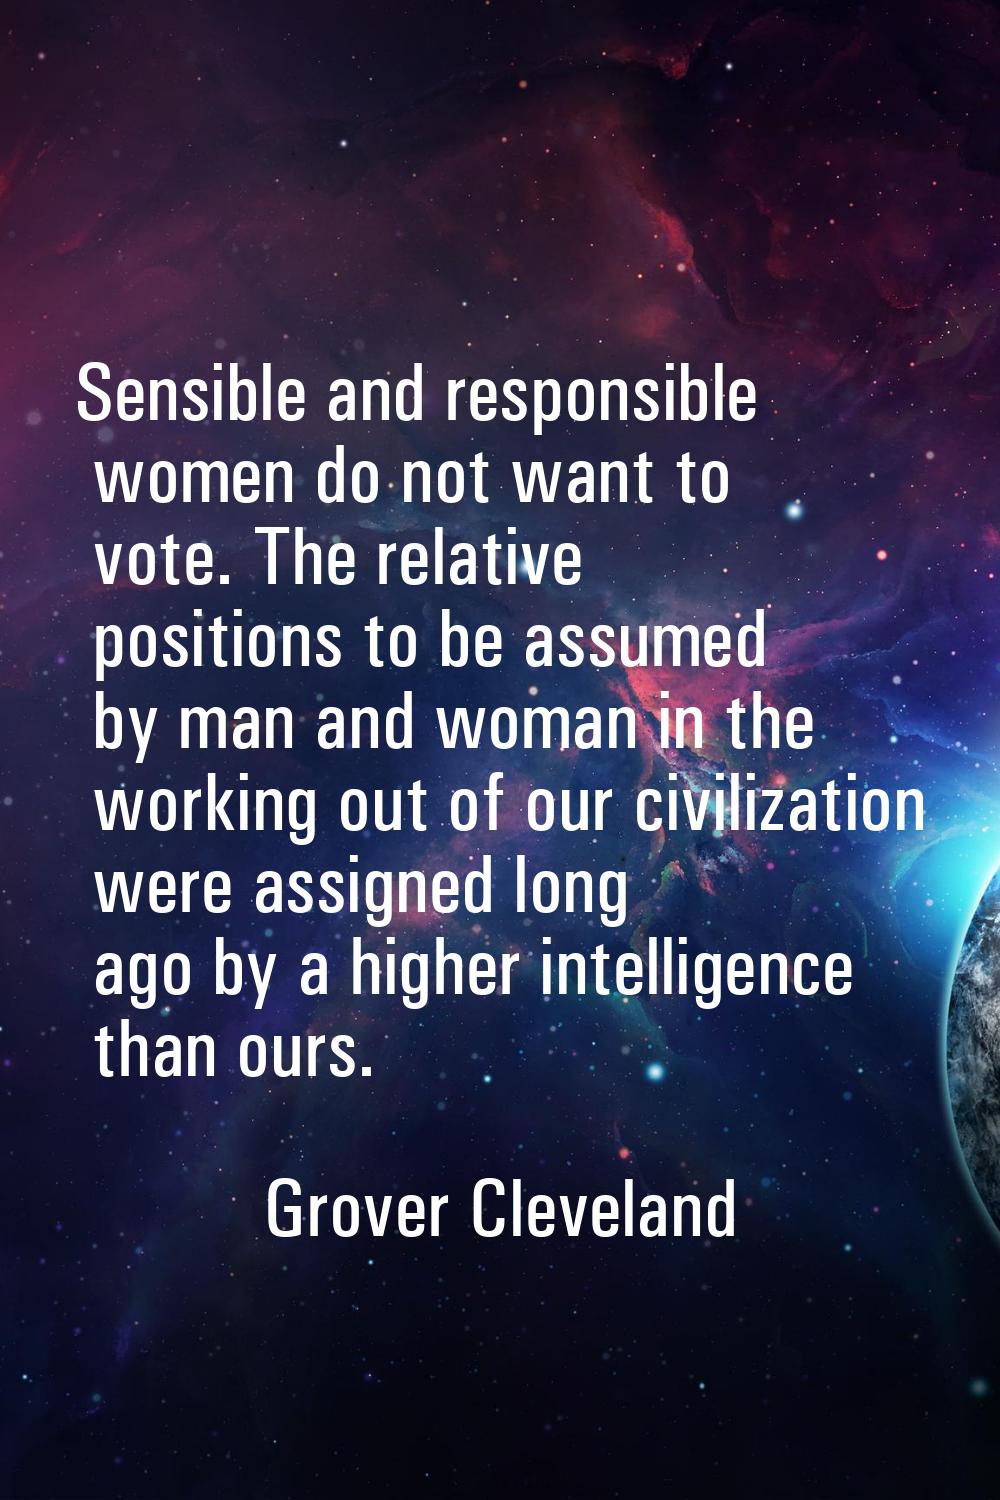 Sensible and responsible women do not want to vote. The relative positions to be assumed by man and